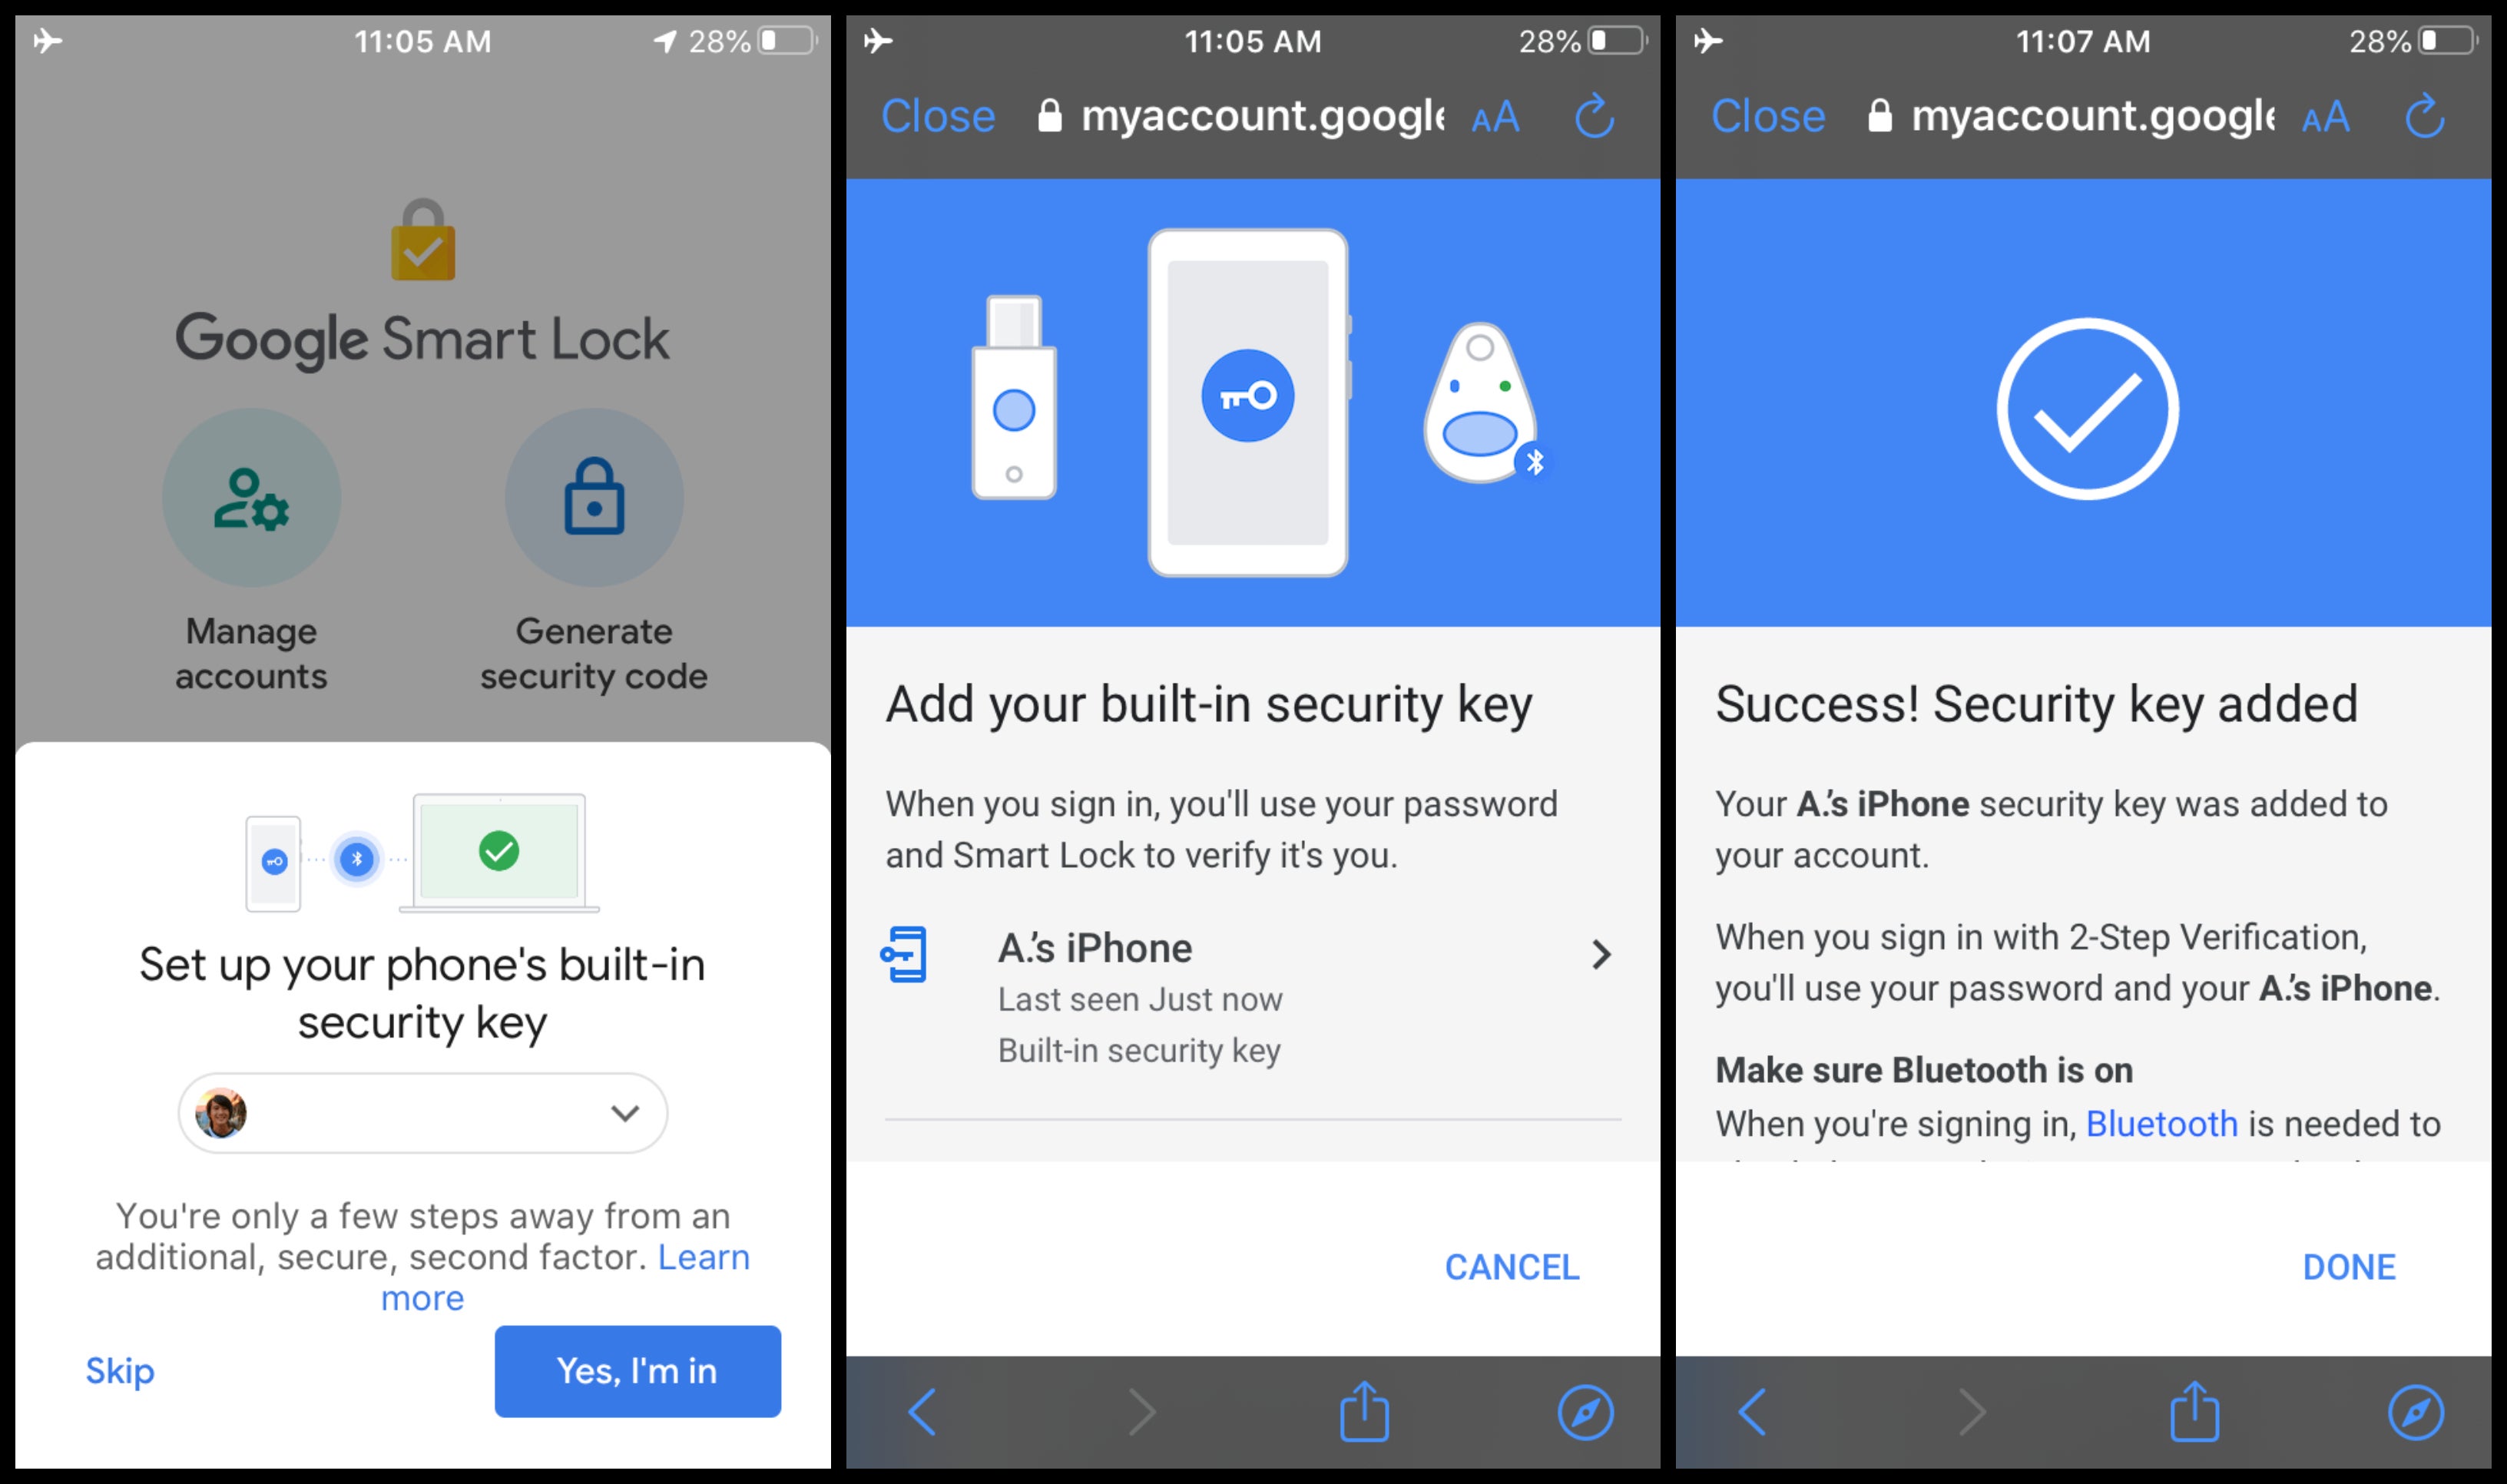 Photos courtesy of 9to5Google - Google introduces iPhone support for an important security feature